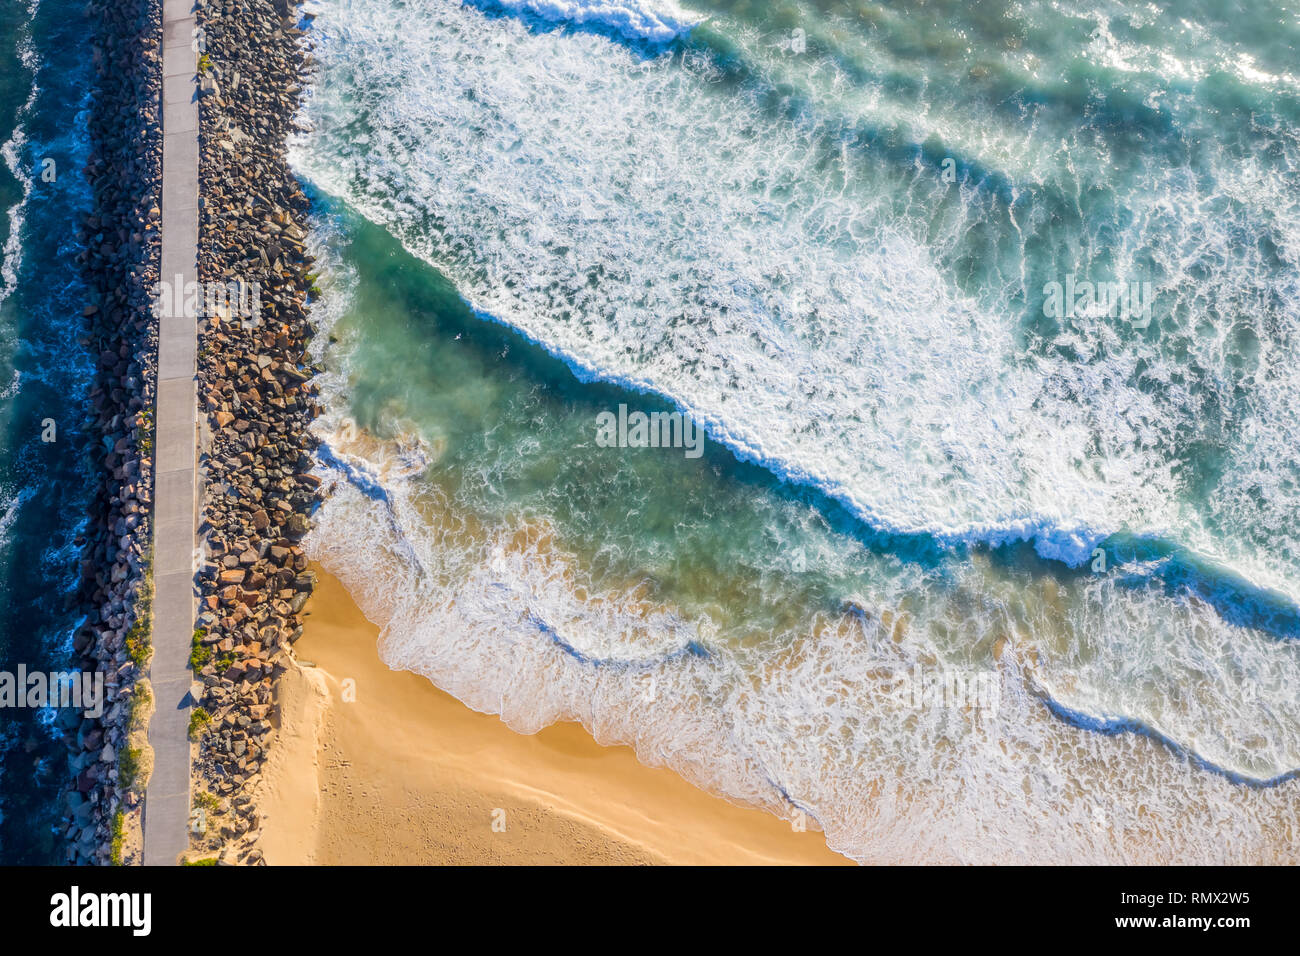 A straight down view of the Breakwall at Nobbys Beach - Newcastle Australia with rough surf pounding onto the shoreline. Nobbys BEach - Newcastle - NS Stock Photo